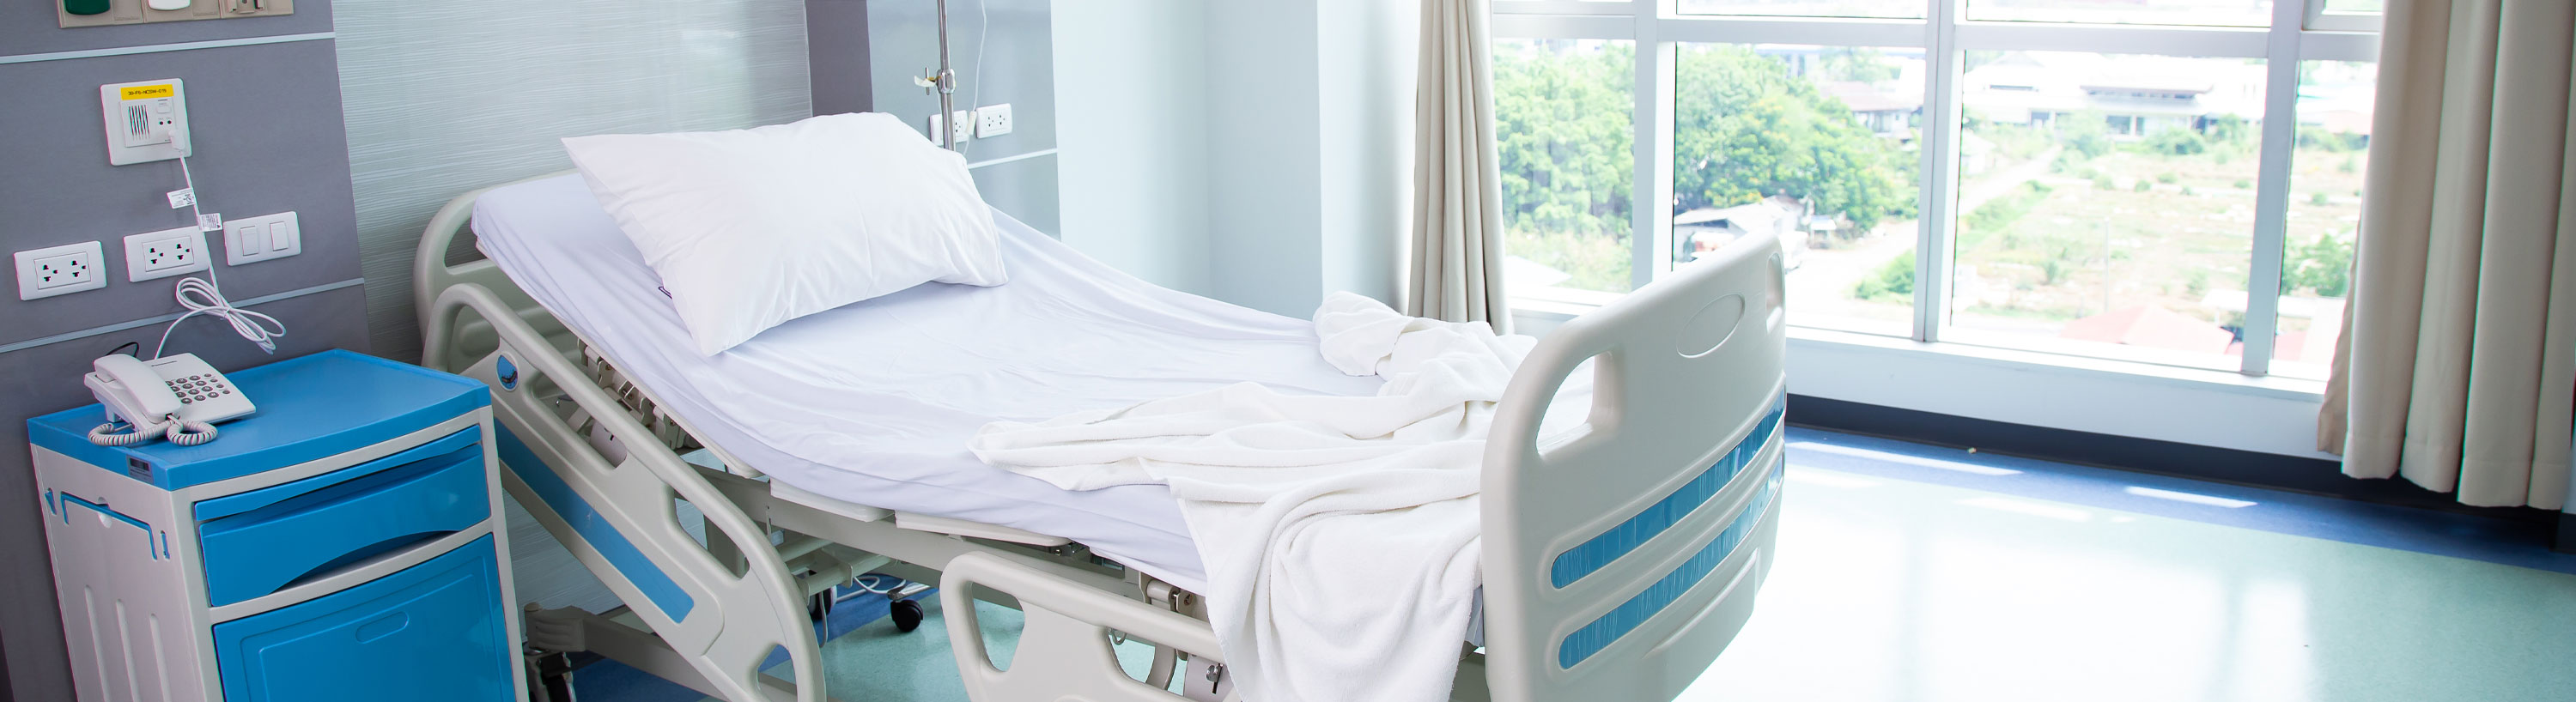 Banner picture of a patient room with a swing bed, side table, phone, IV drip roller, and pretty view outside a large indoor window.